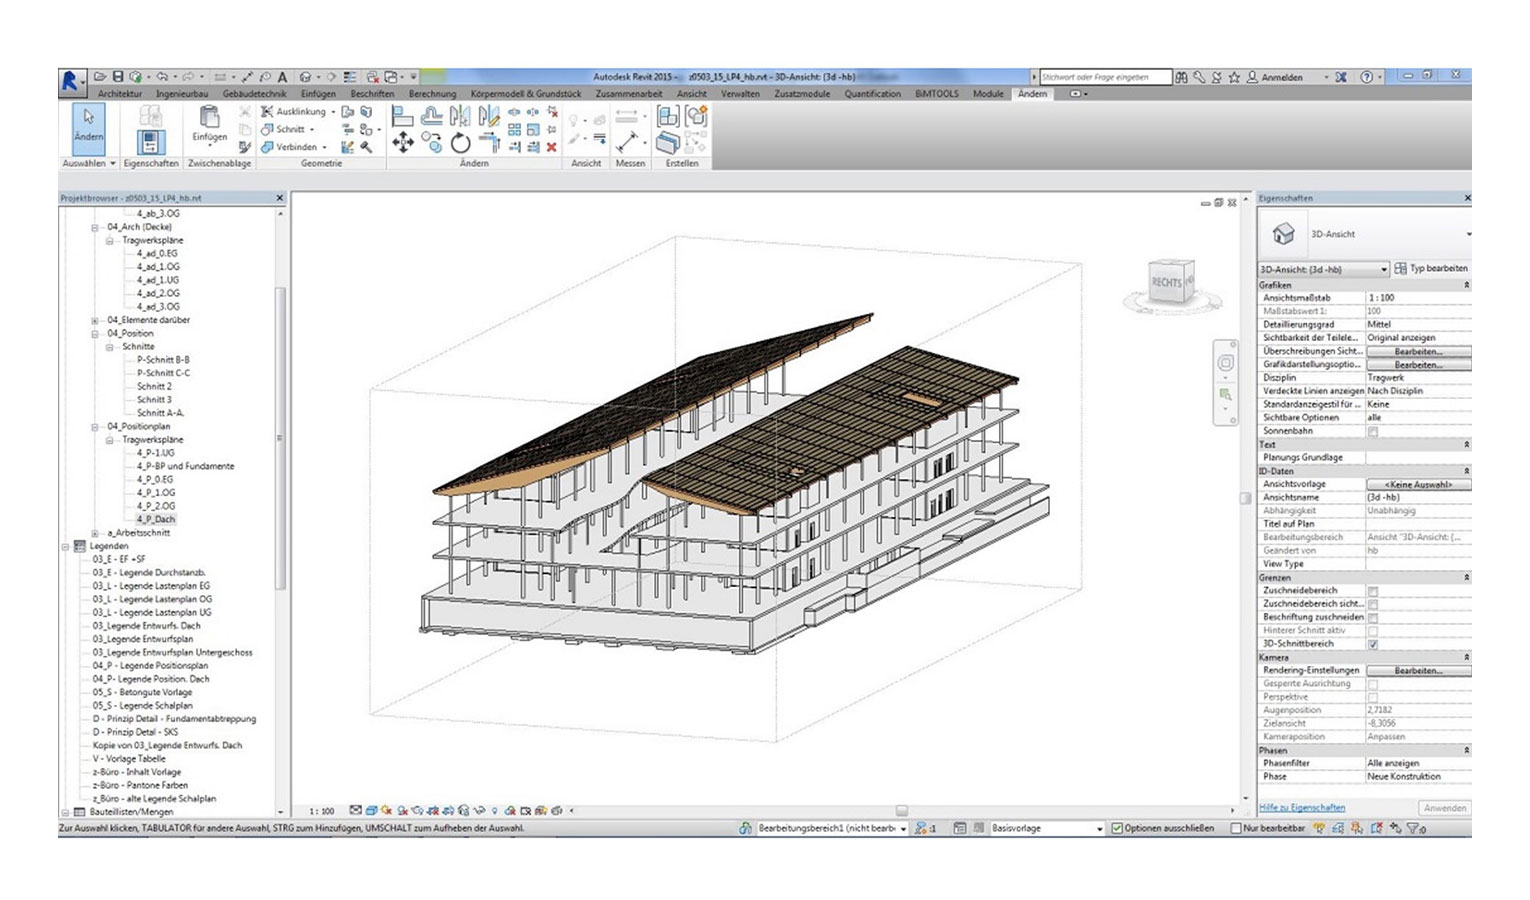 Creation and coordination of BIM models